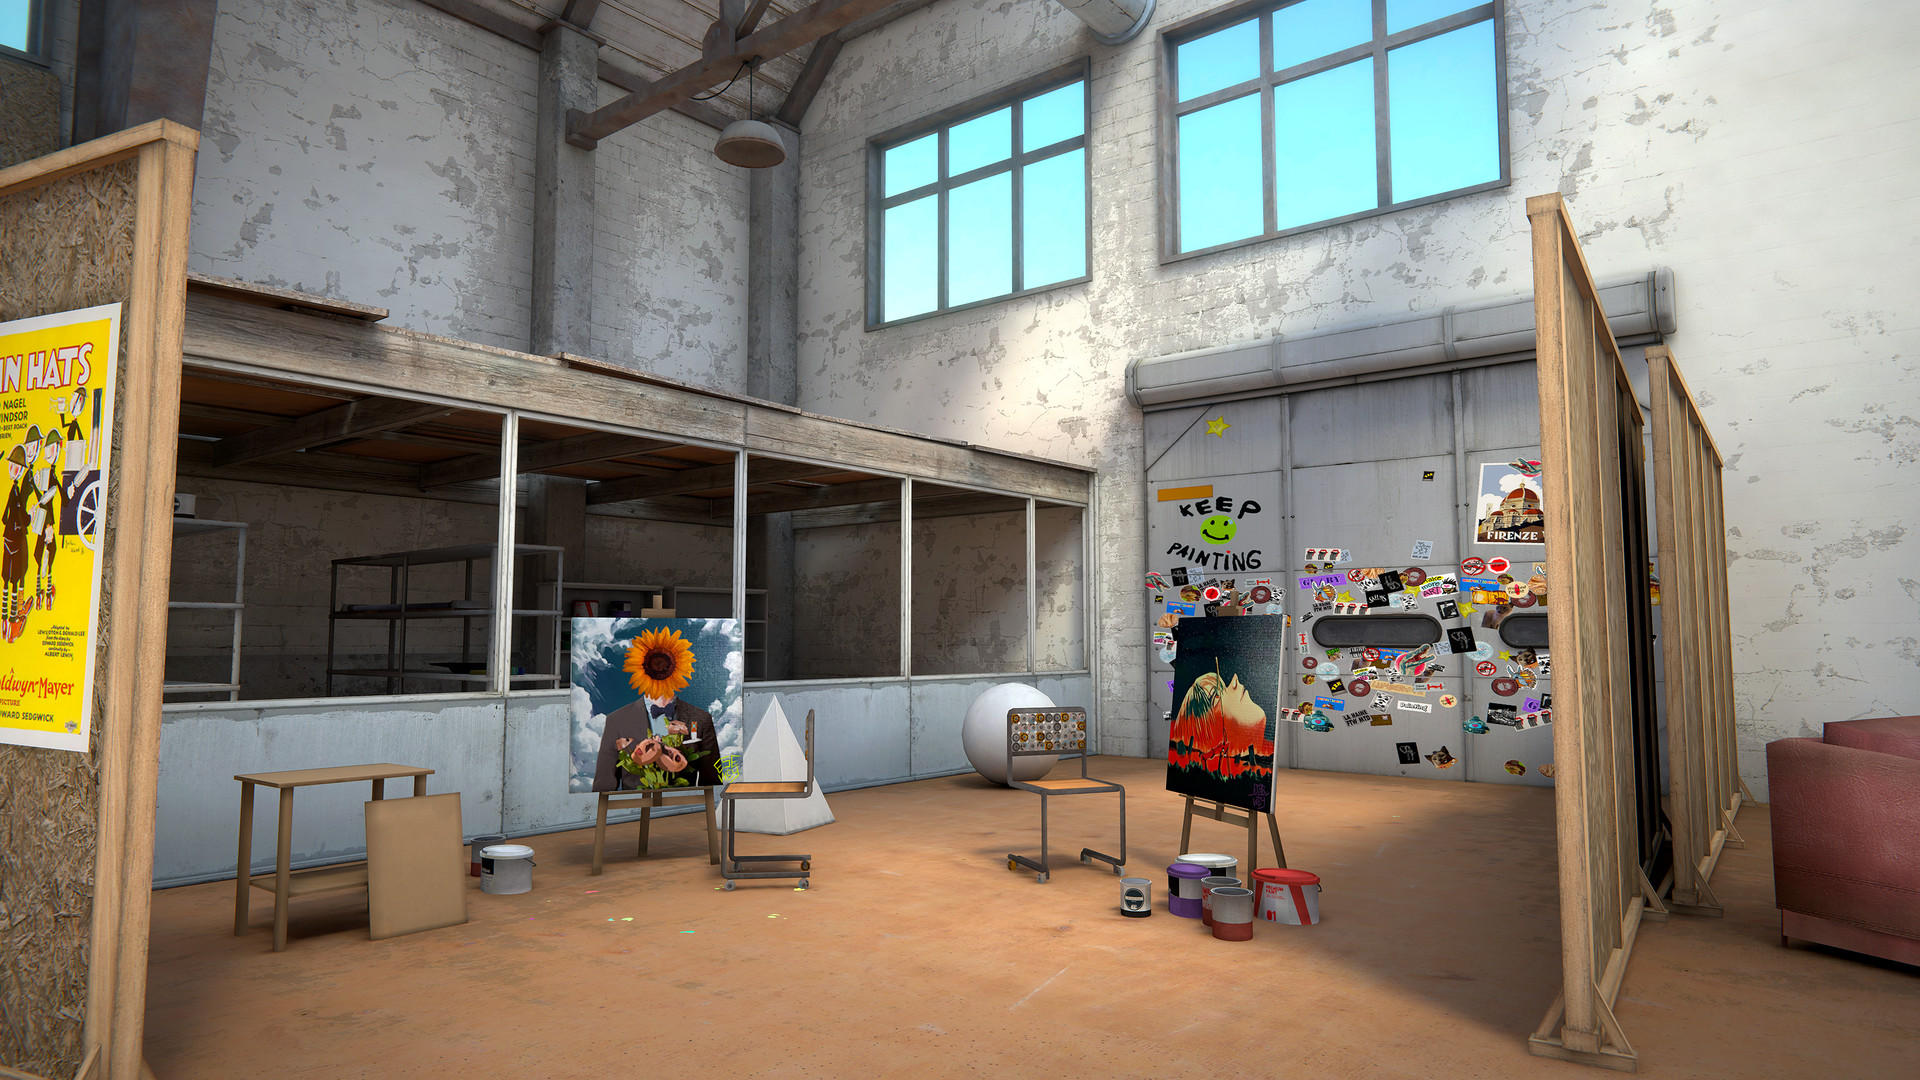 Painting VR successfully blends practicality with virtual reality